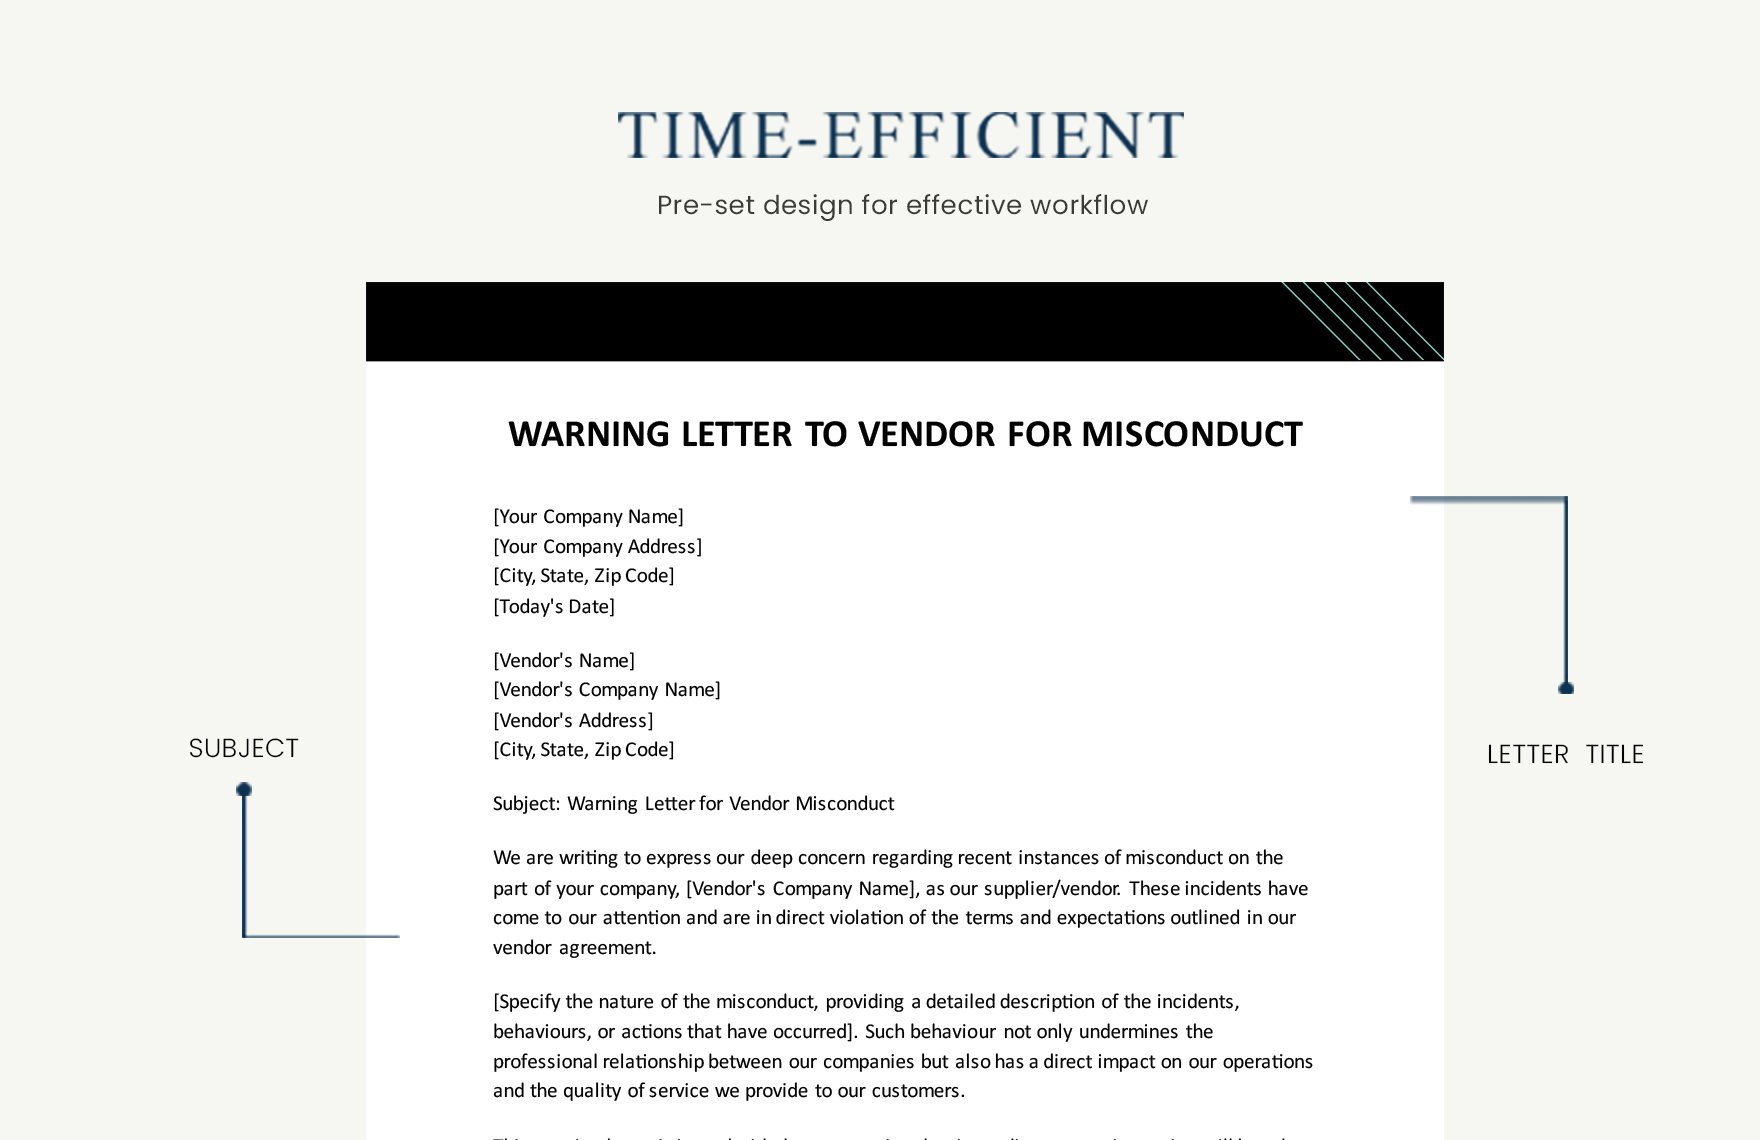 Warning Letter To Vendor For Misconduct